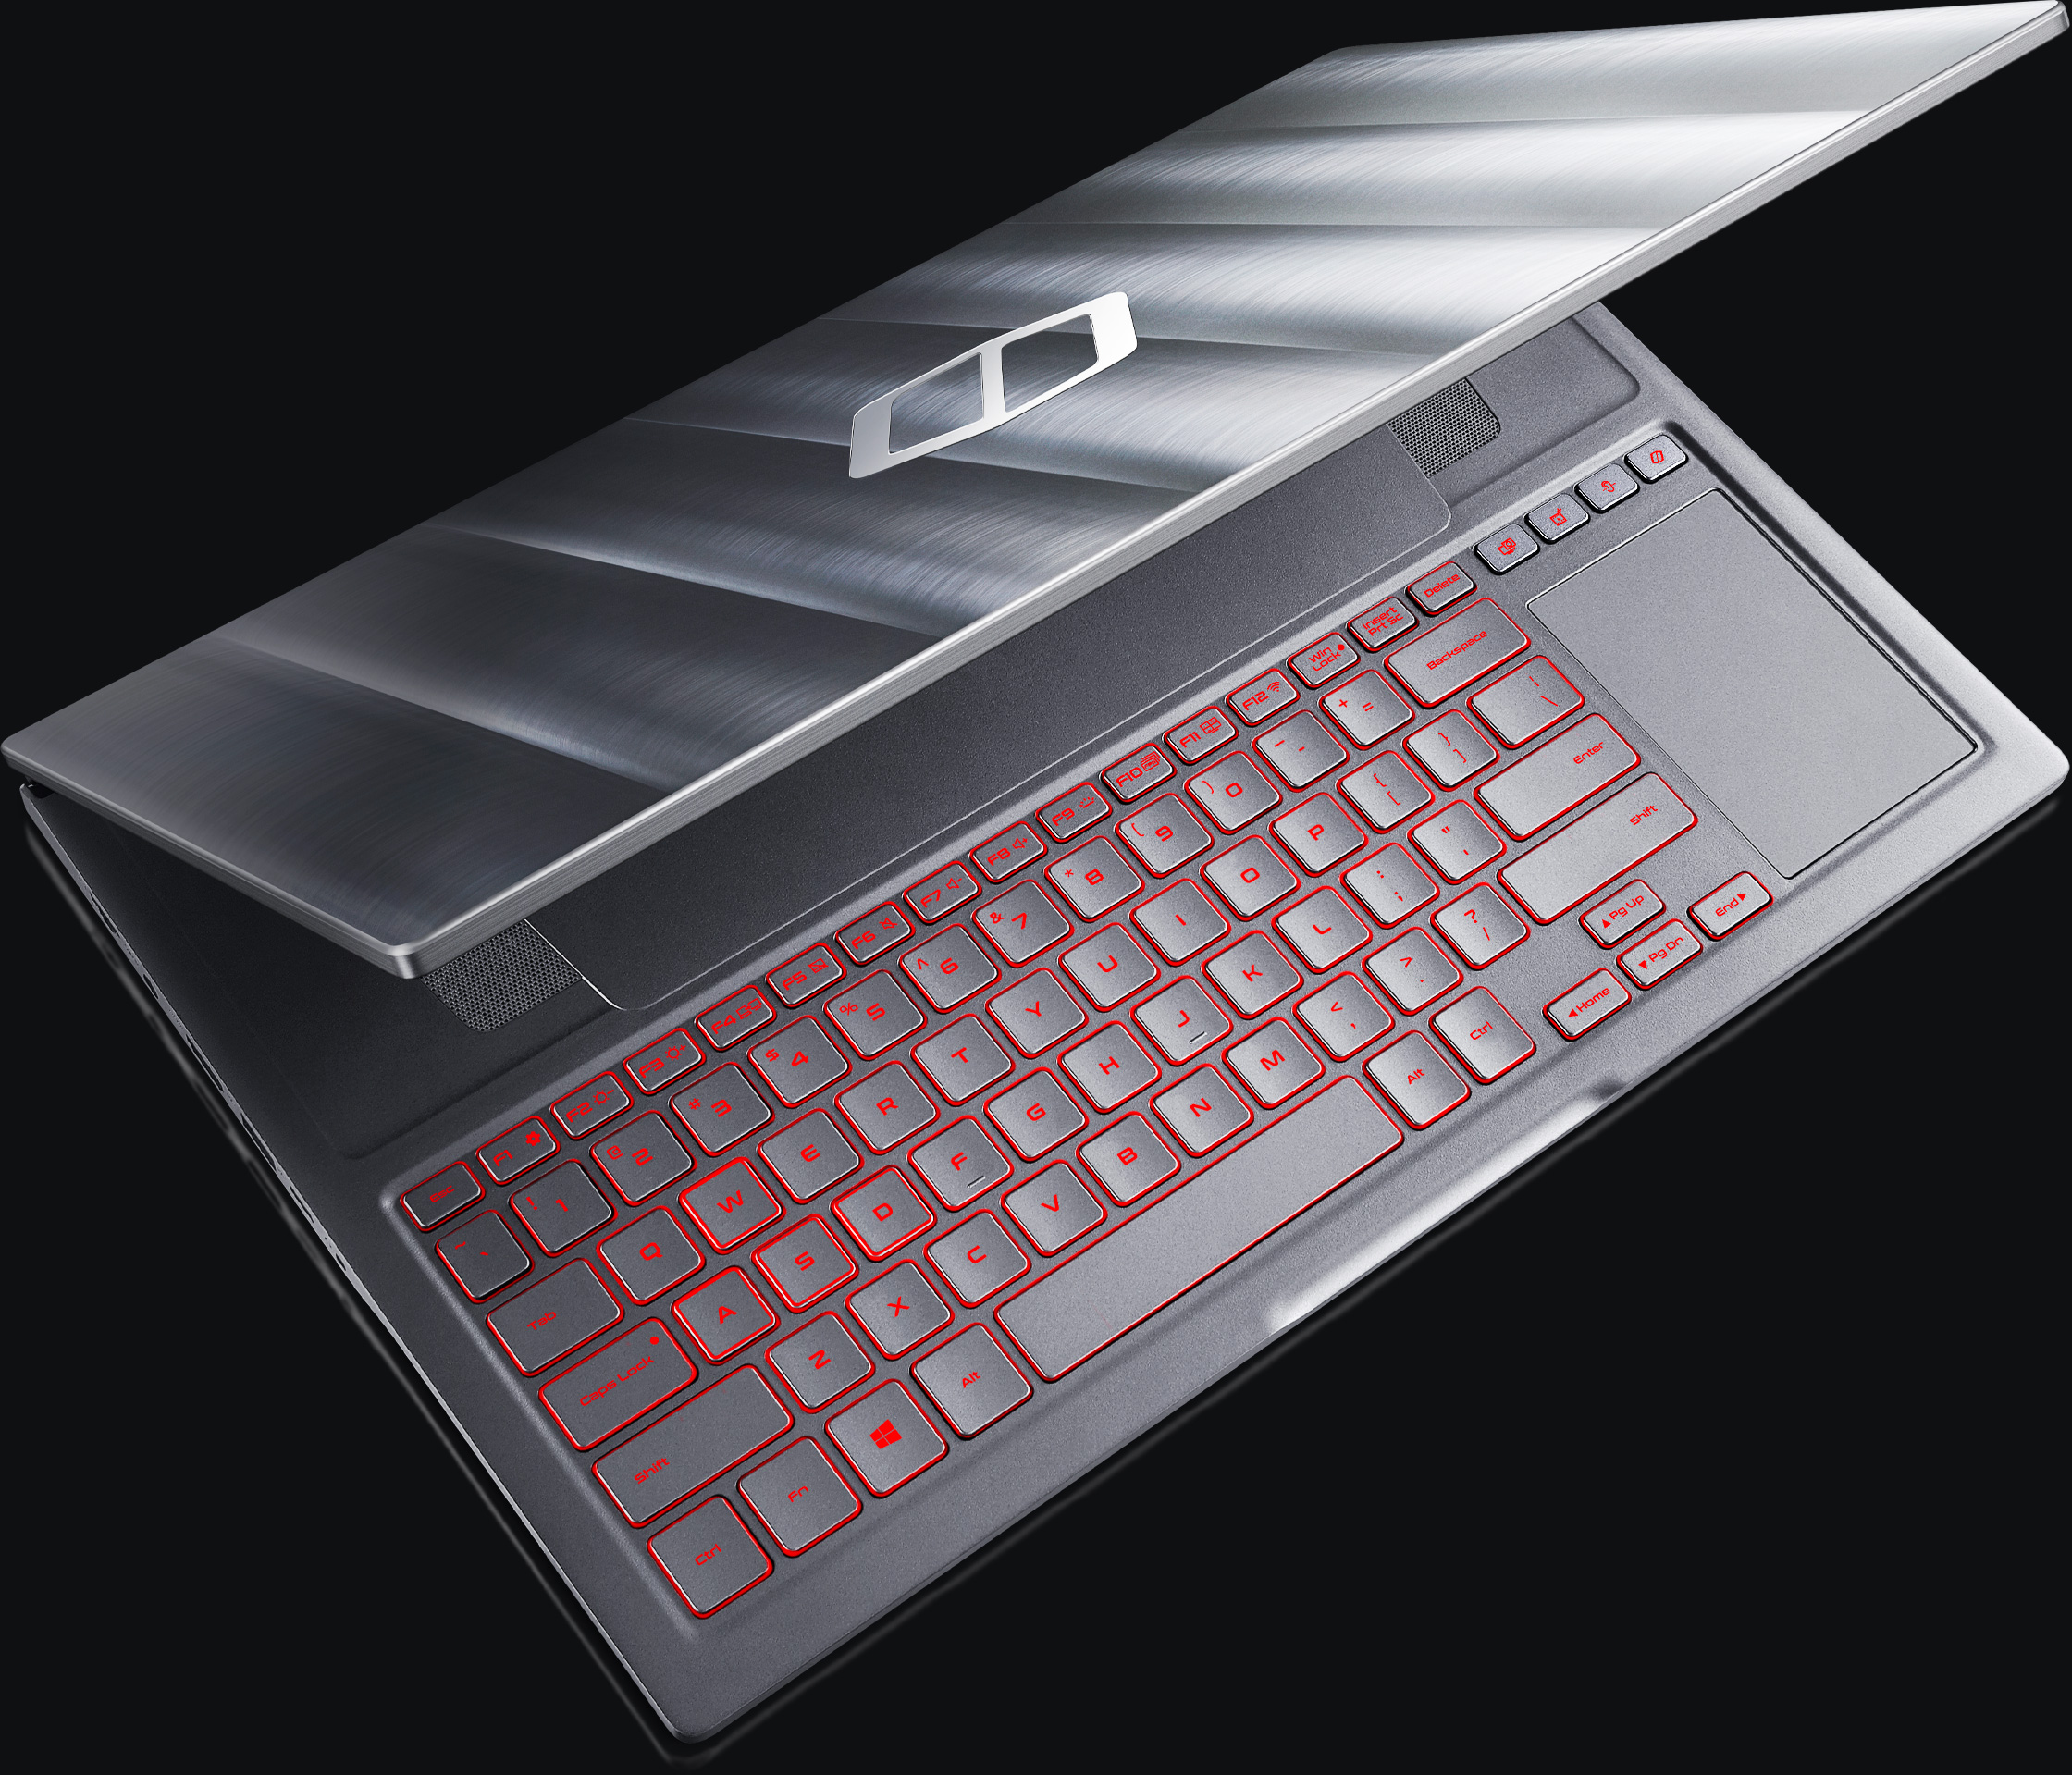 This is an image of Odyssey Z’s keyboard.